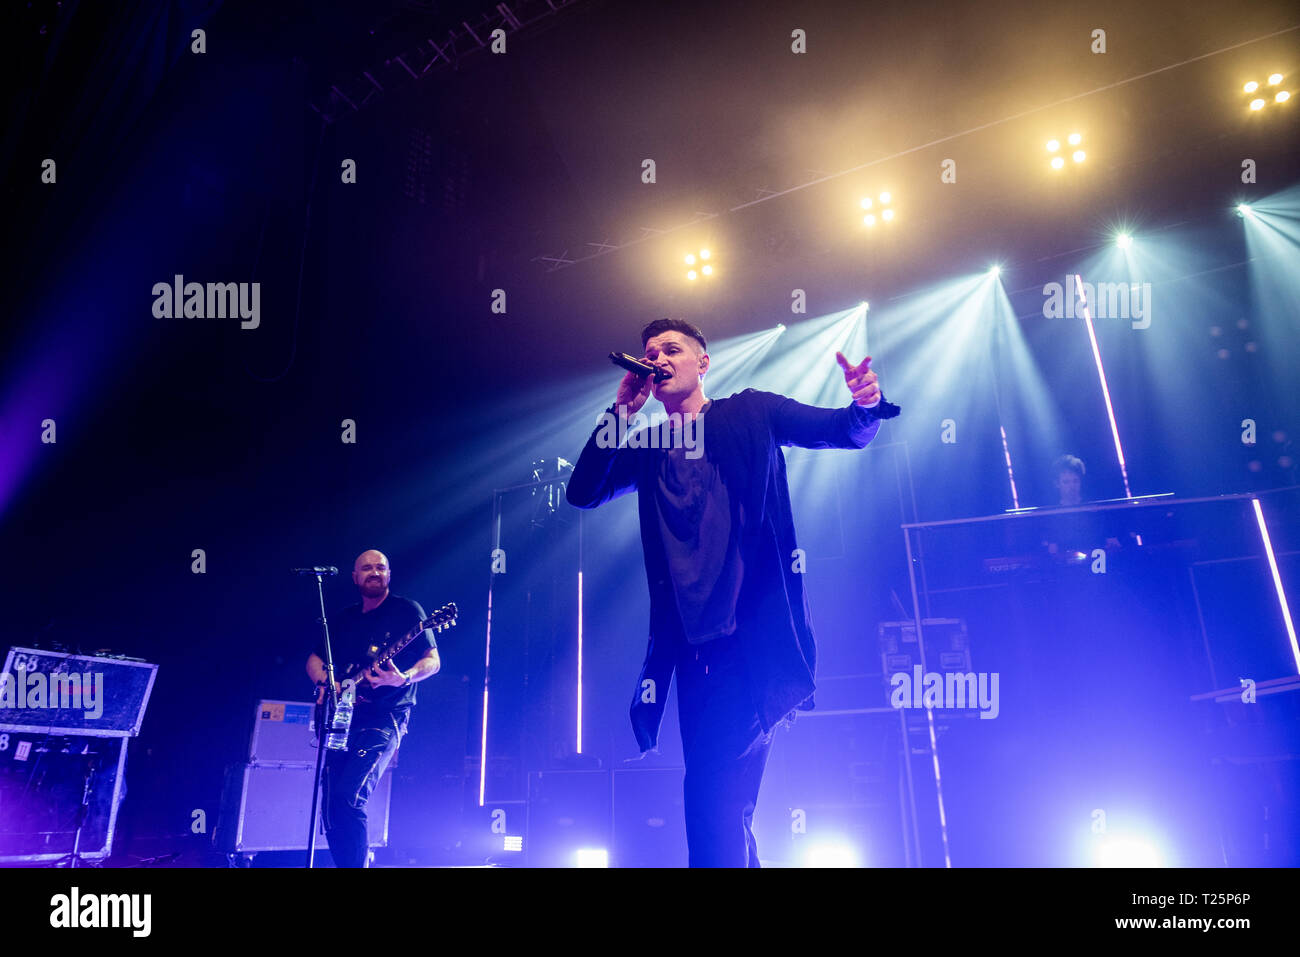 Irish pop rock band The Script perform at Portsmouth Guildhall, UK - 28/03/2019 Stock Photo